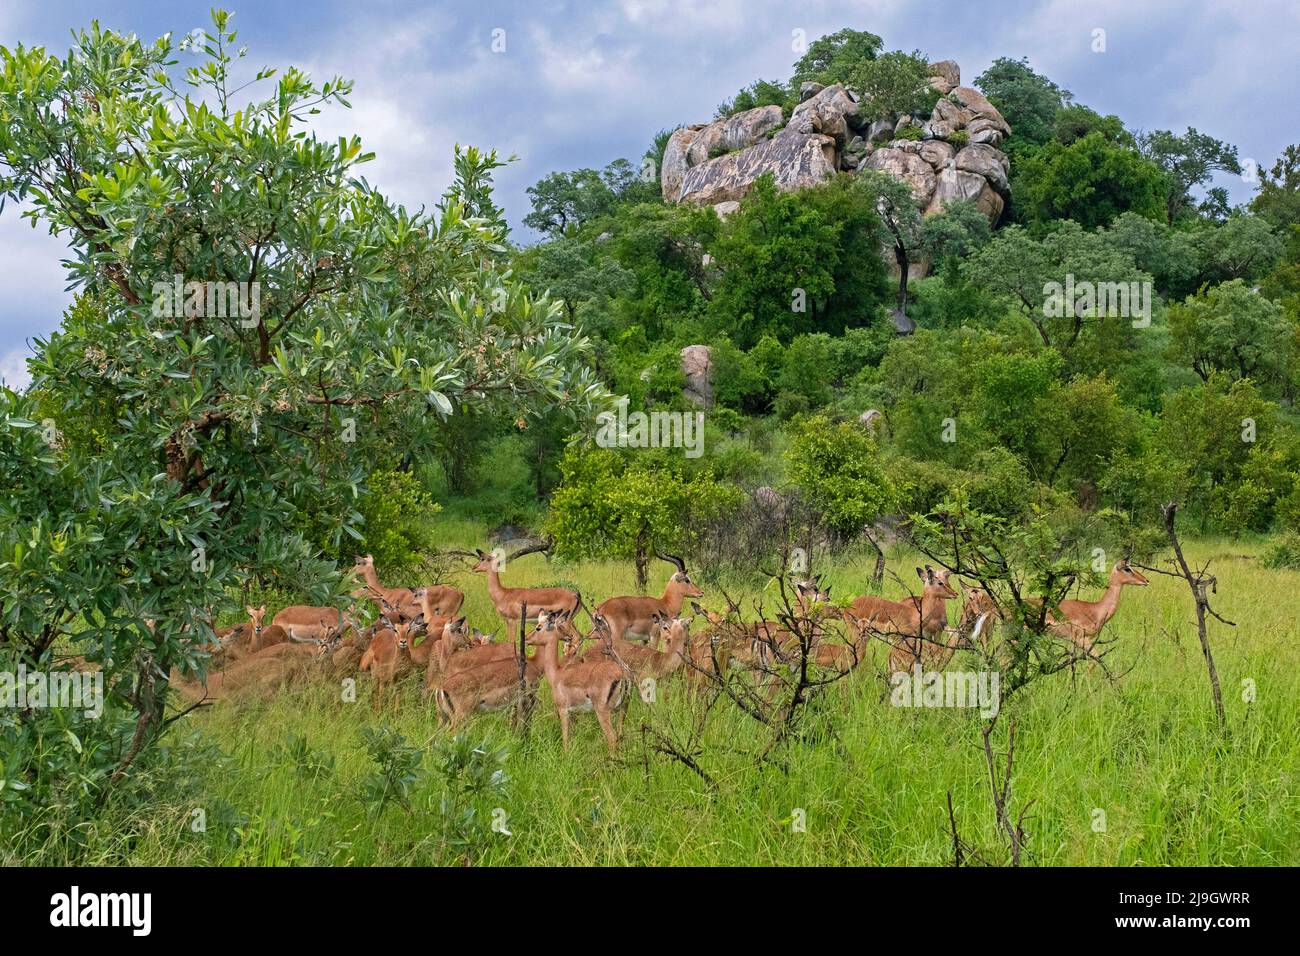 Granite koppie, rocky outcrop and impala herd (Aepyceros melampus) in the Kruger National Park, Mpumalanga province, South Africa Stock Photo